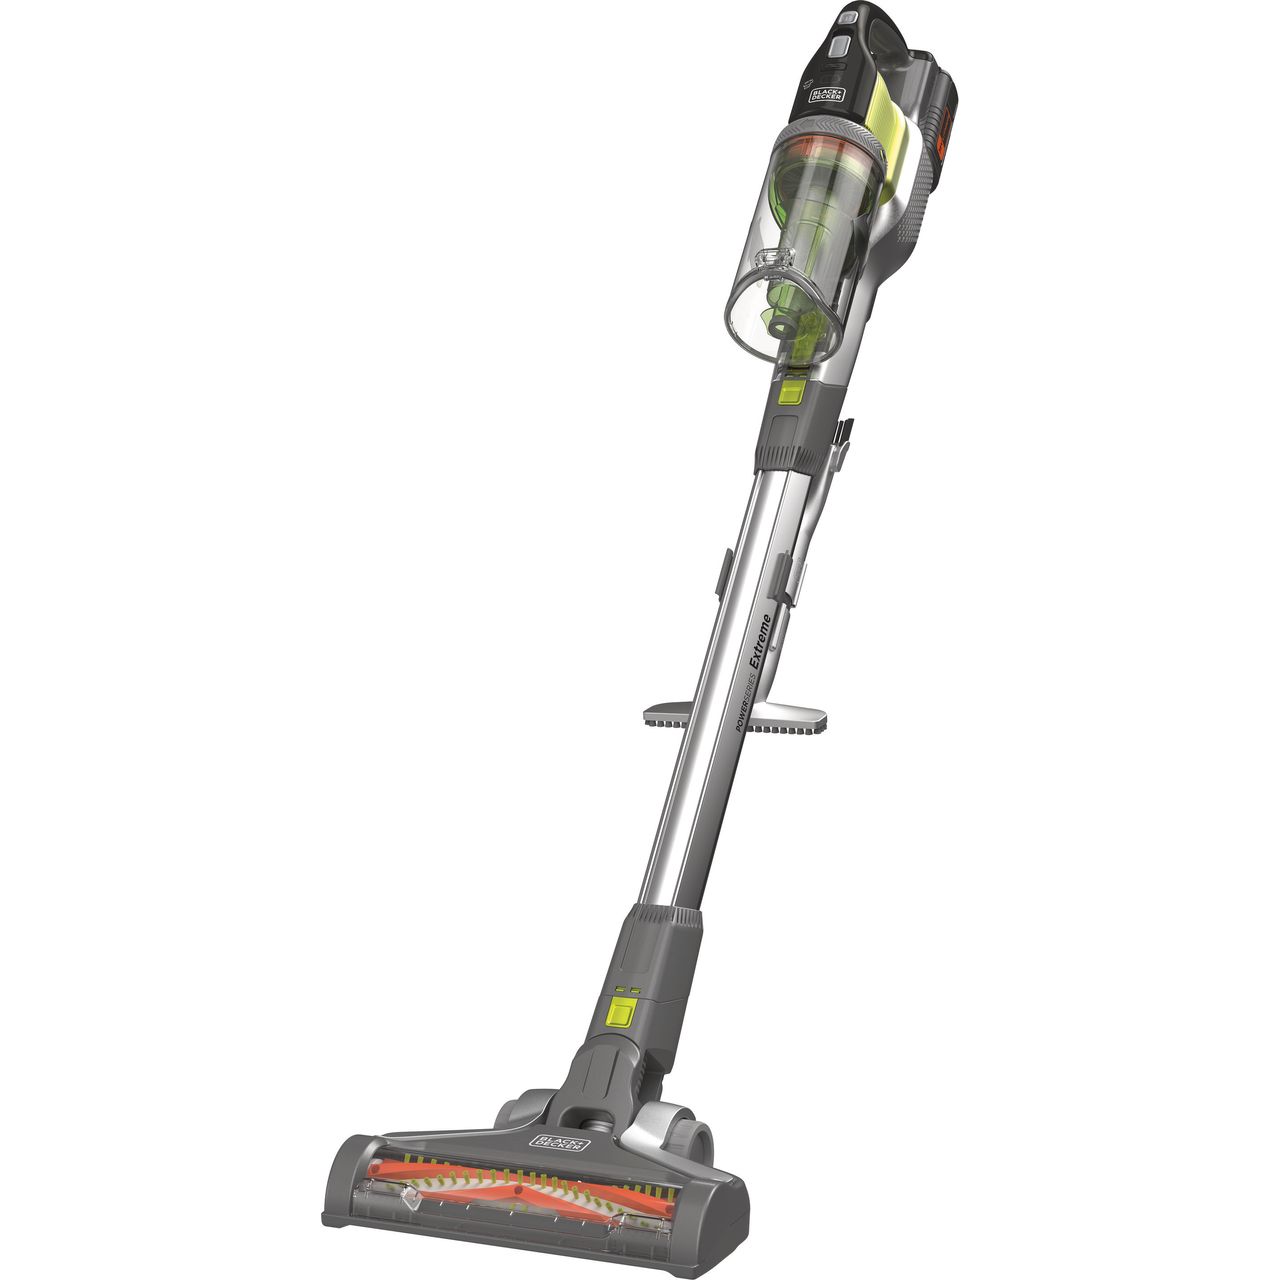 Black + Decker 36v Extension Stick BHFEV362DA-GB Cordless Vacuum Cleaner with up to 78 Minutes Run Time Review